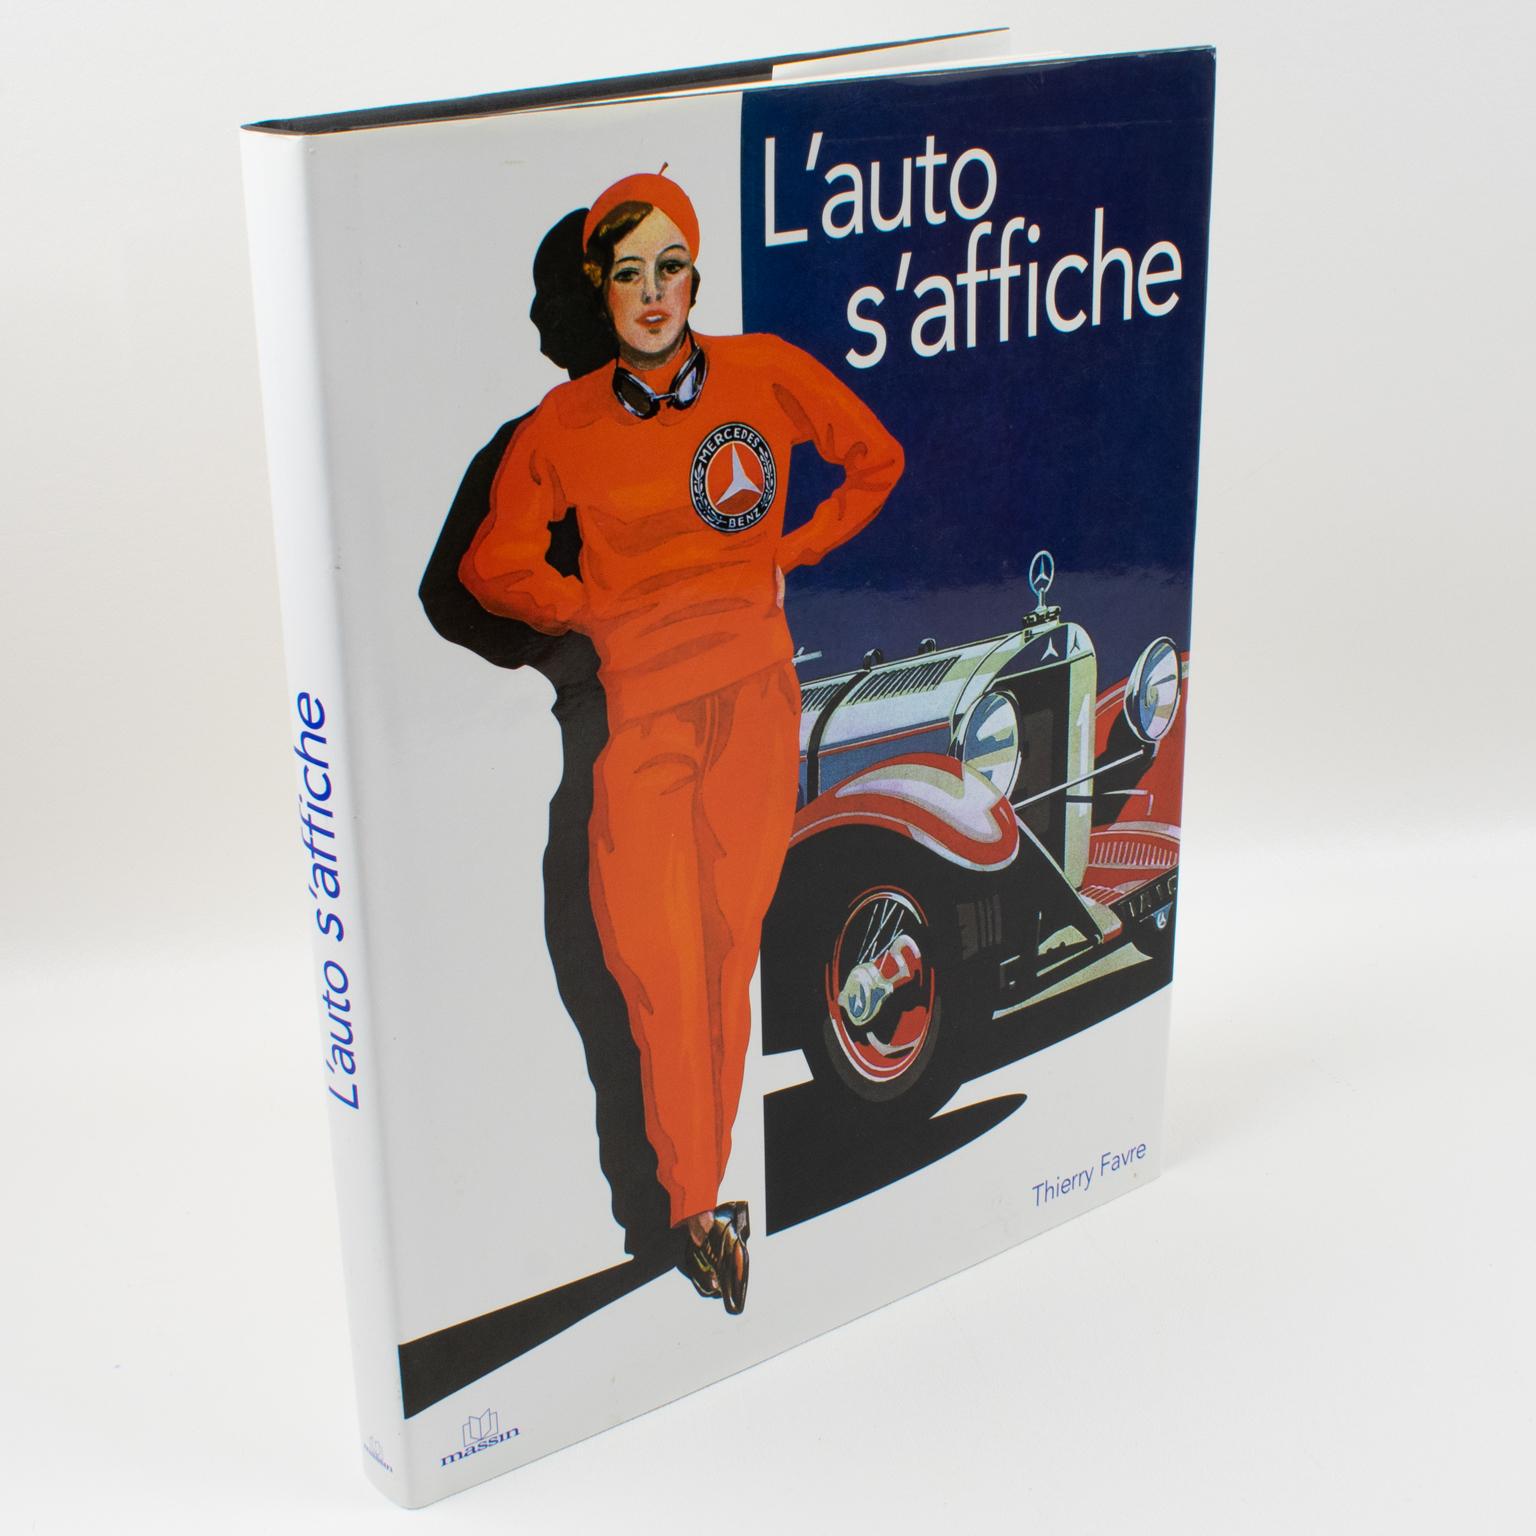 L'Auto s'affiche (The Cars in Posters), French Book by Thierry Favre, 2007.
Prefaced by Louis Schweitzer, this book unveils a formidable collection of graphic posters illustrating automobile history. This retrospective allows an understanding of